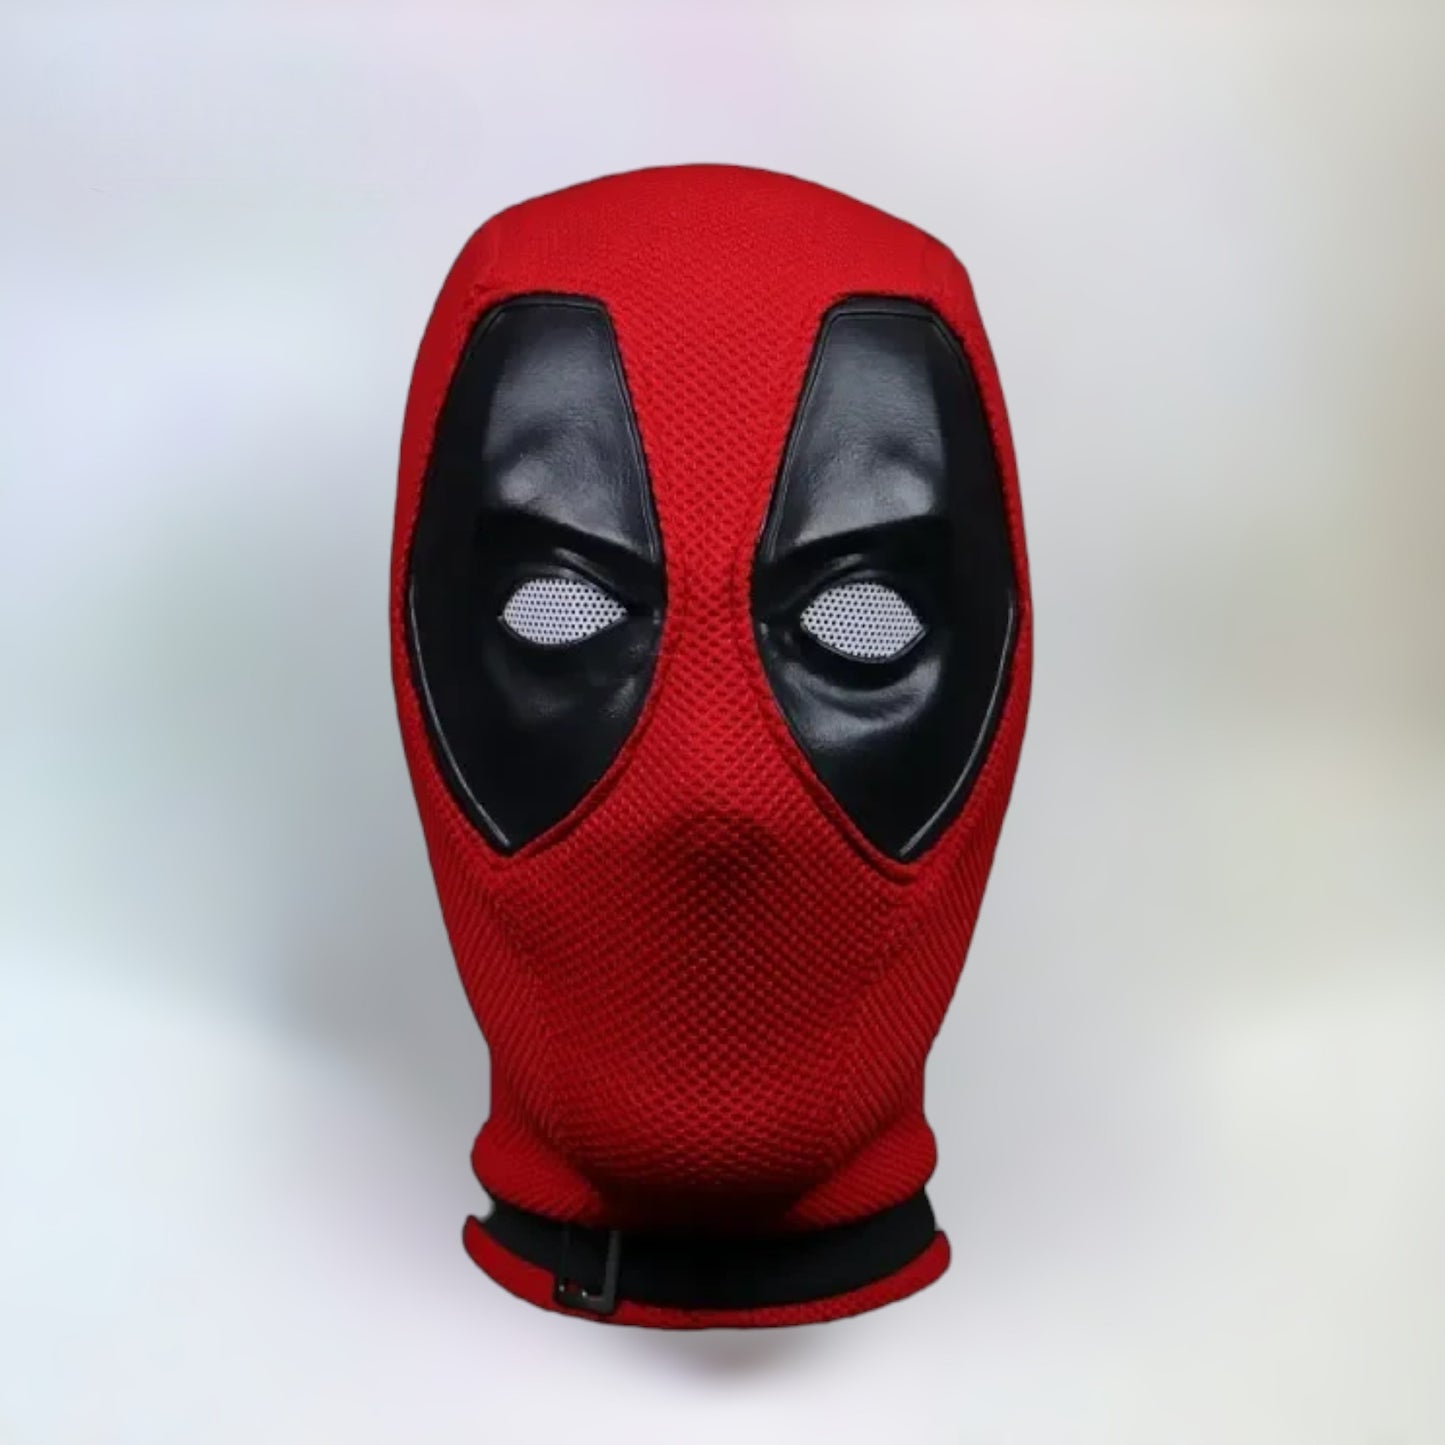 Deadpool mask fabric and leather eyes, deadpool and wolverine, deadpool mask with plain white background.